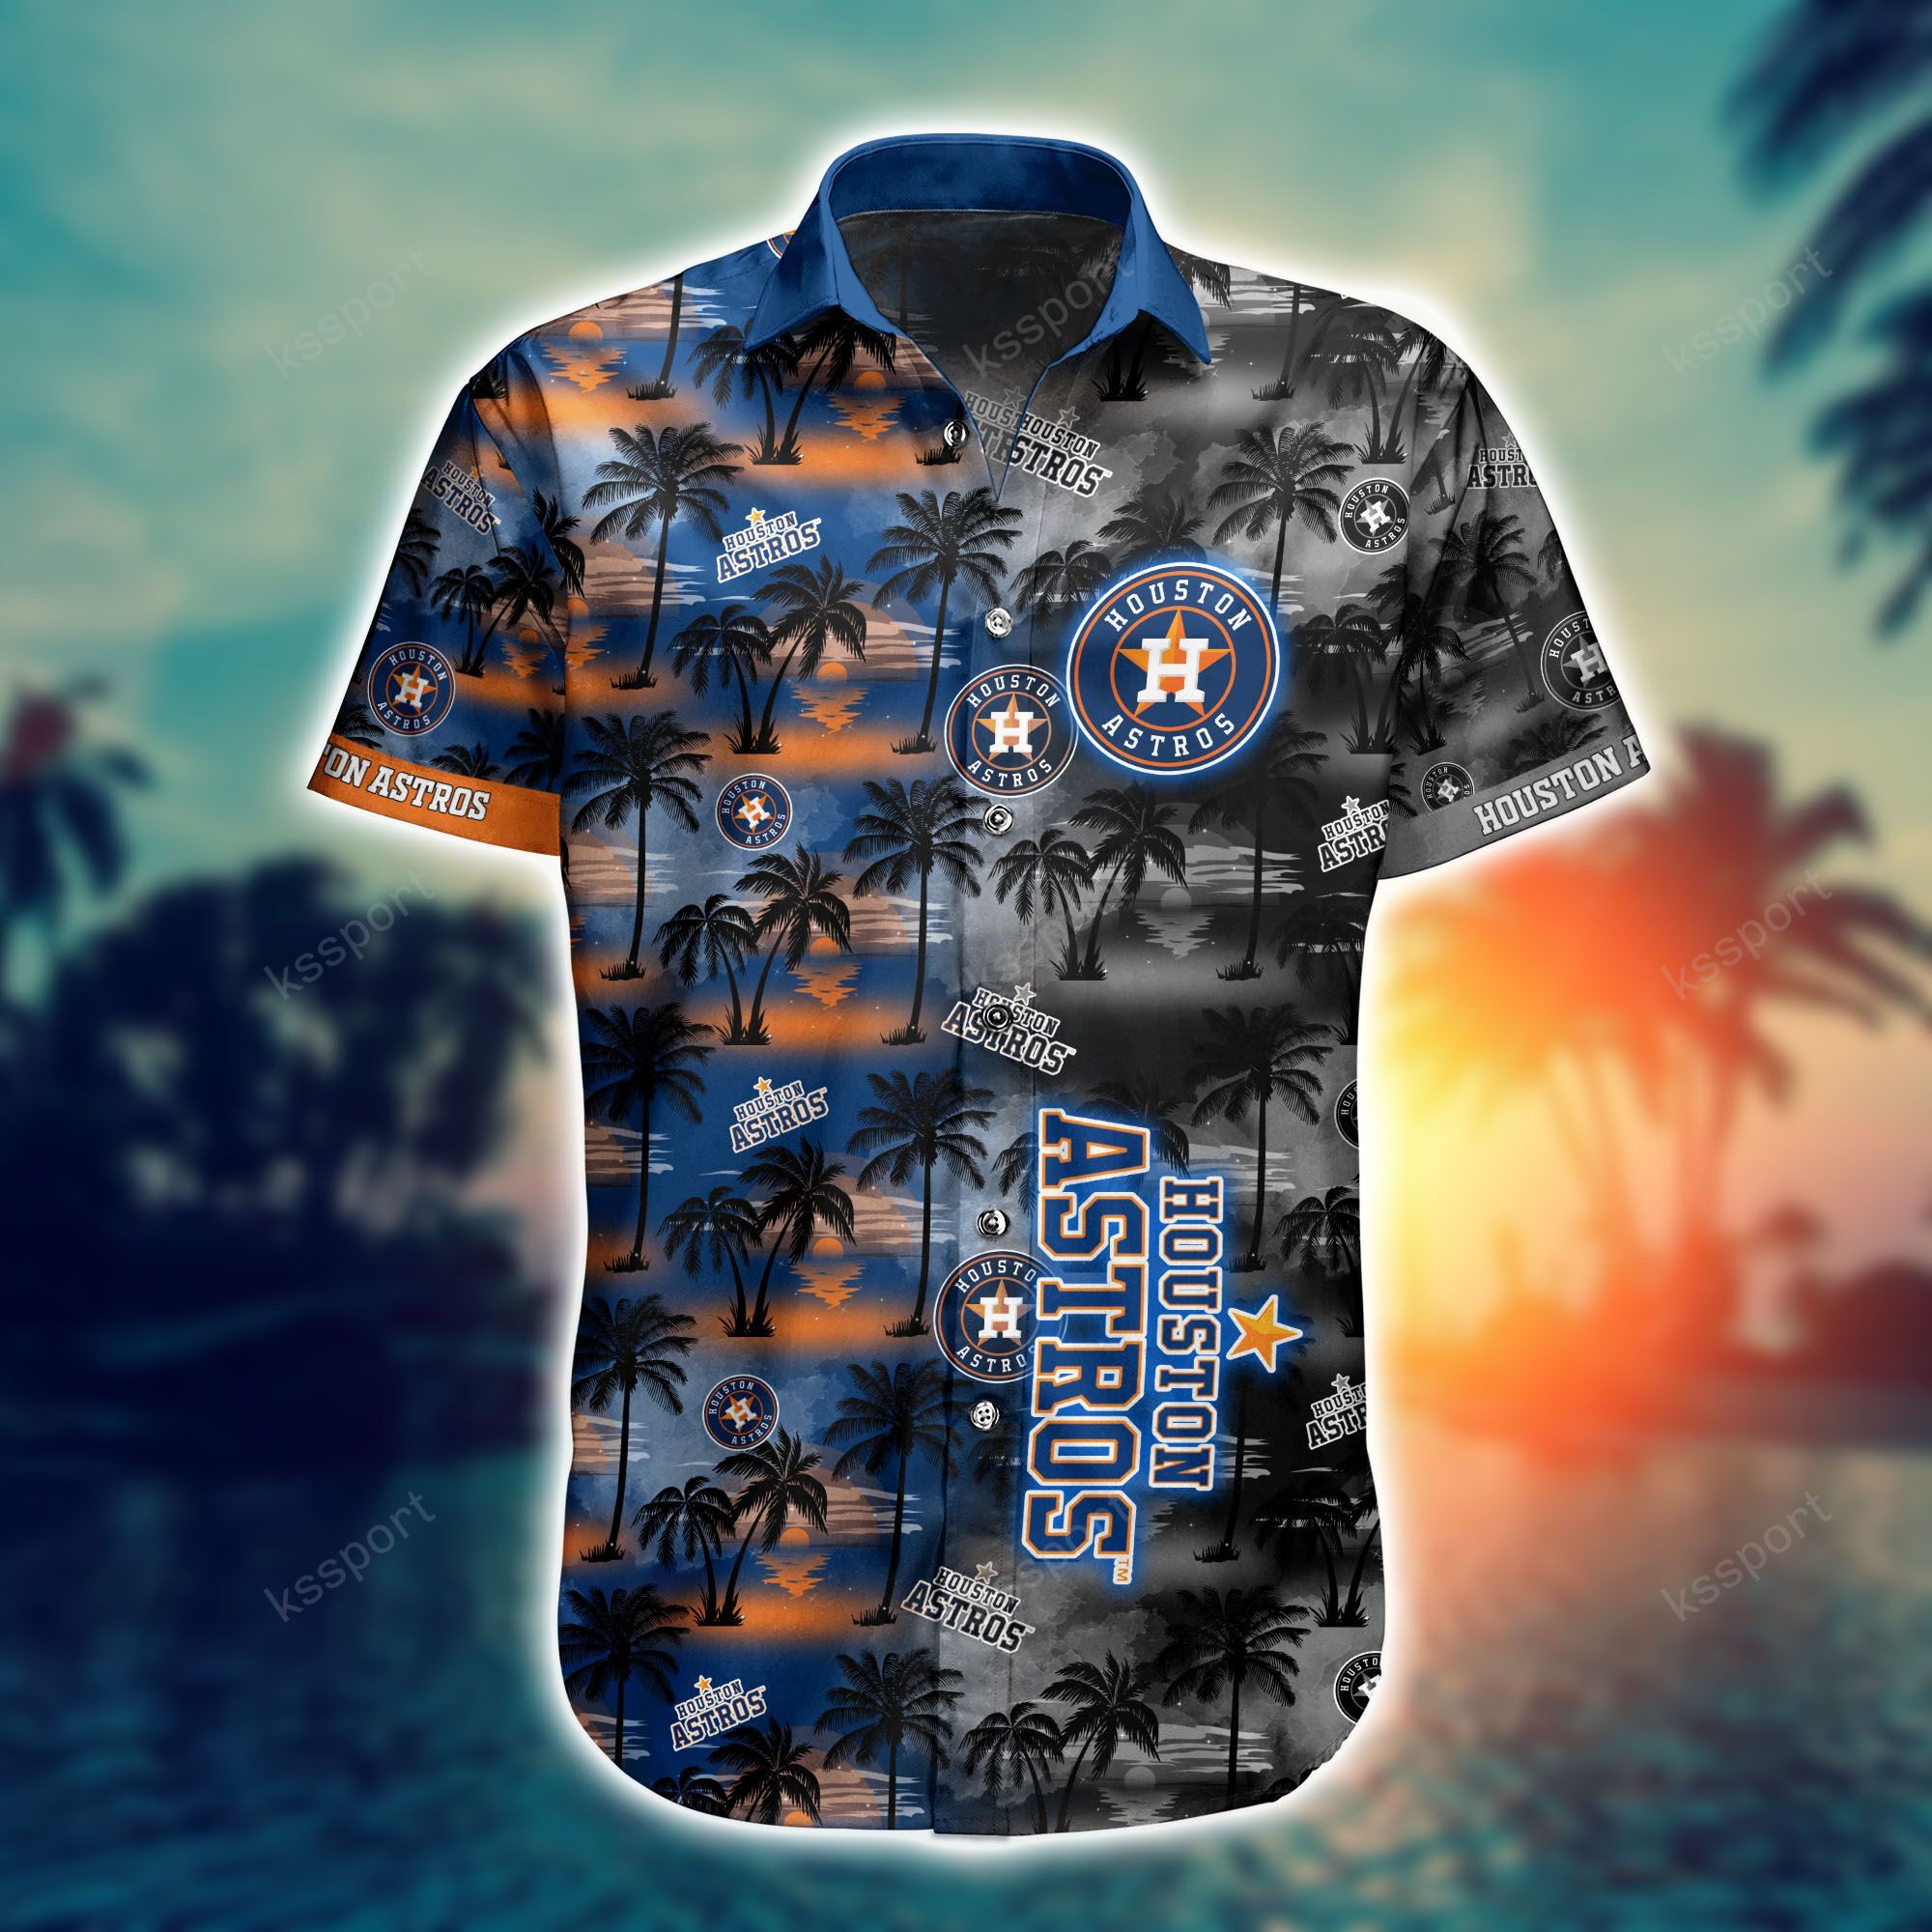 Top cool Hawaiian shirt 2022 - Make sure you get yours today before they run out! 235